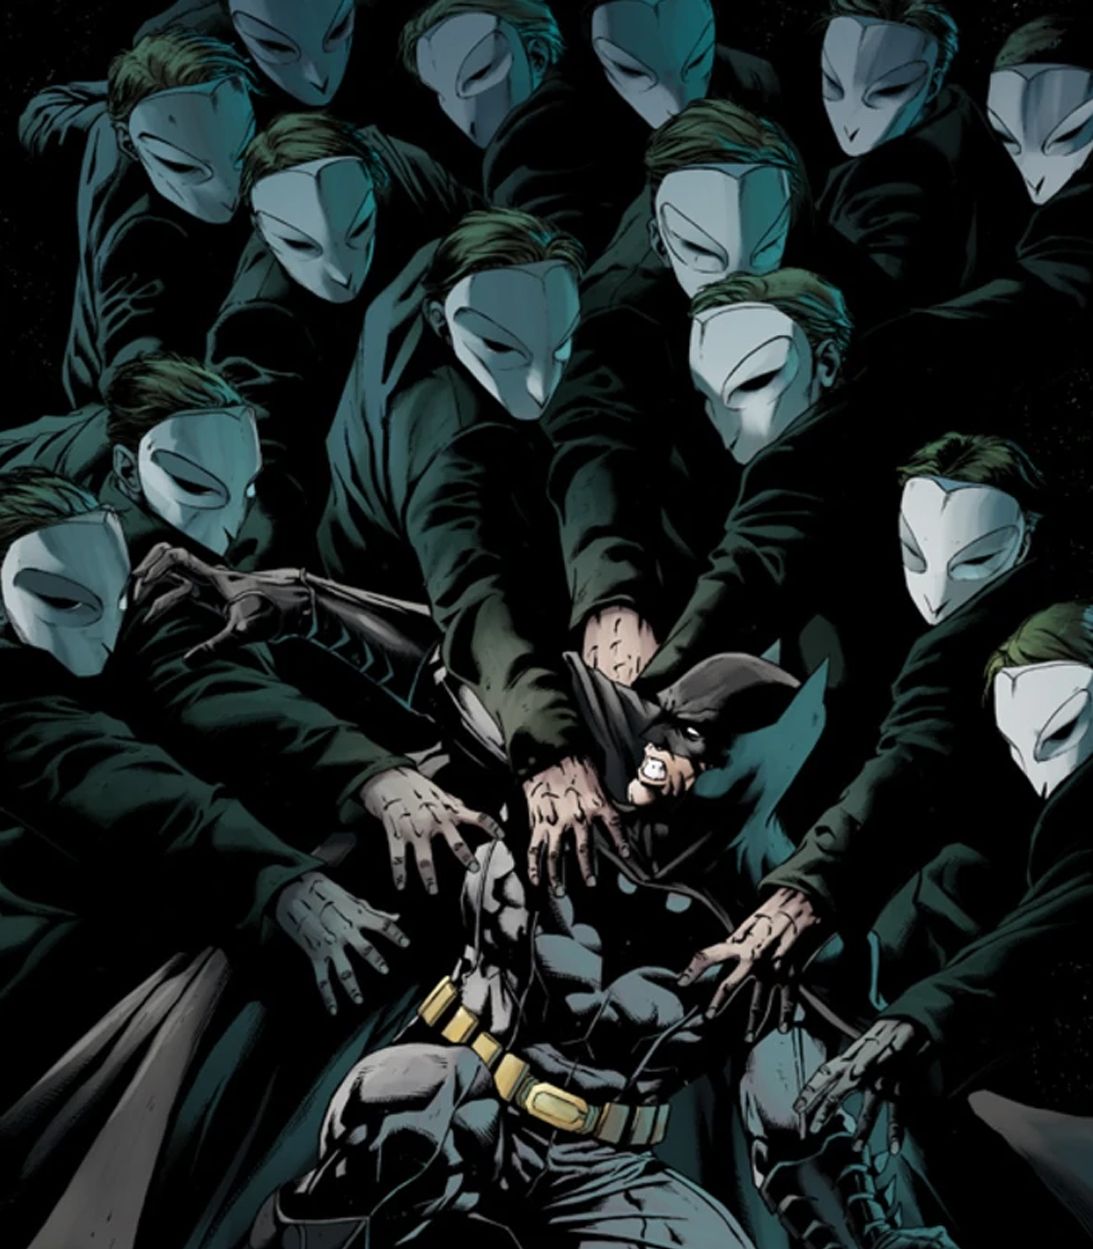 1093 Court of Owls